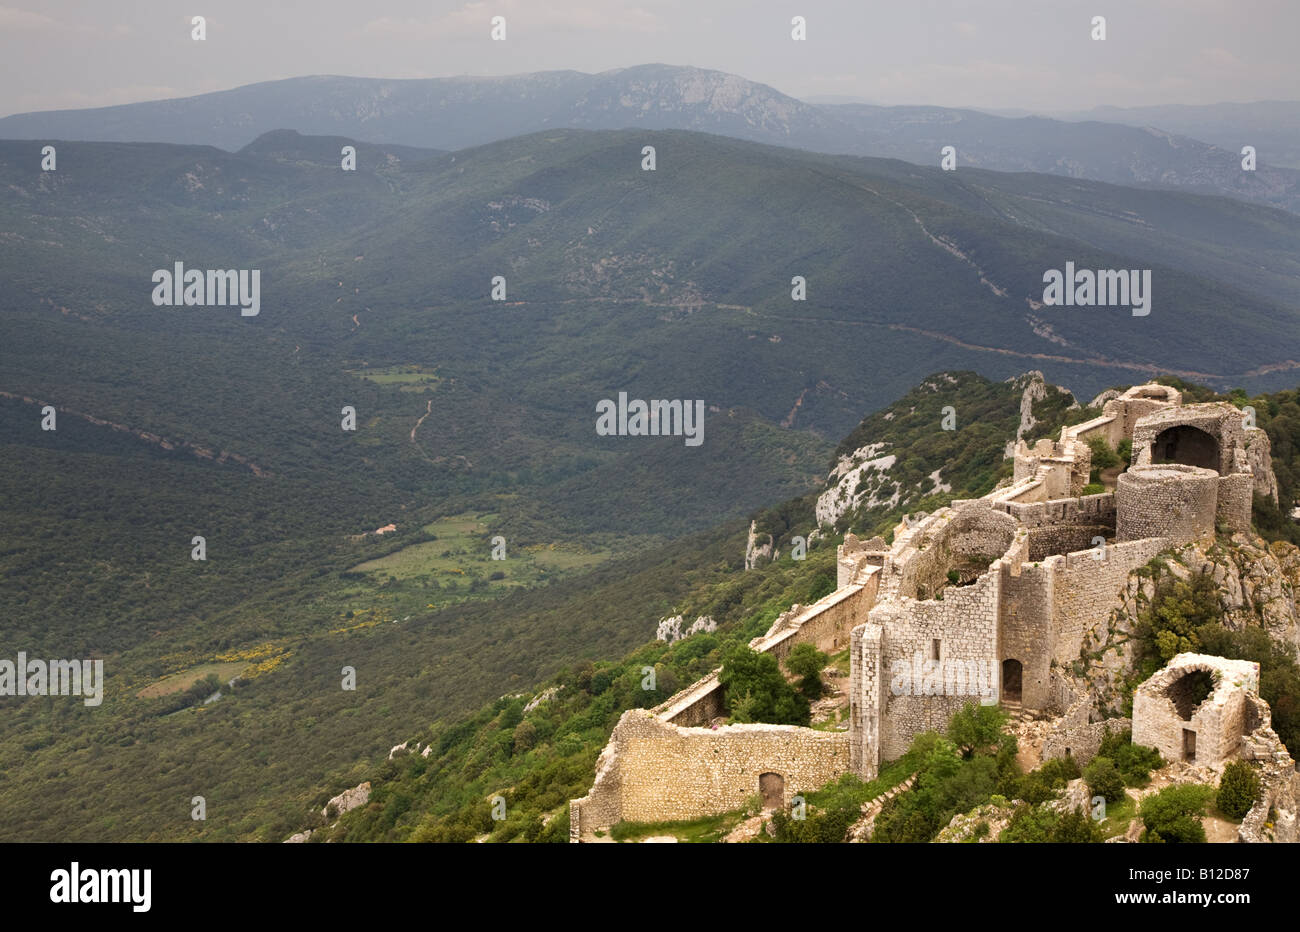 A mountainous landscape view from castle ruins in the French Pyrenees Languedoc Roussillon Southern France Stock Photo